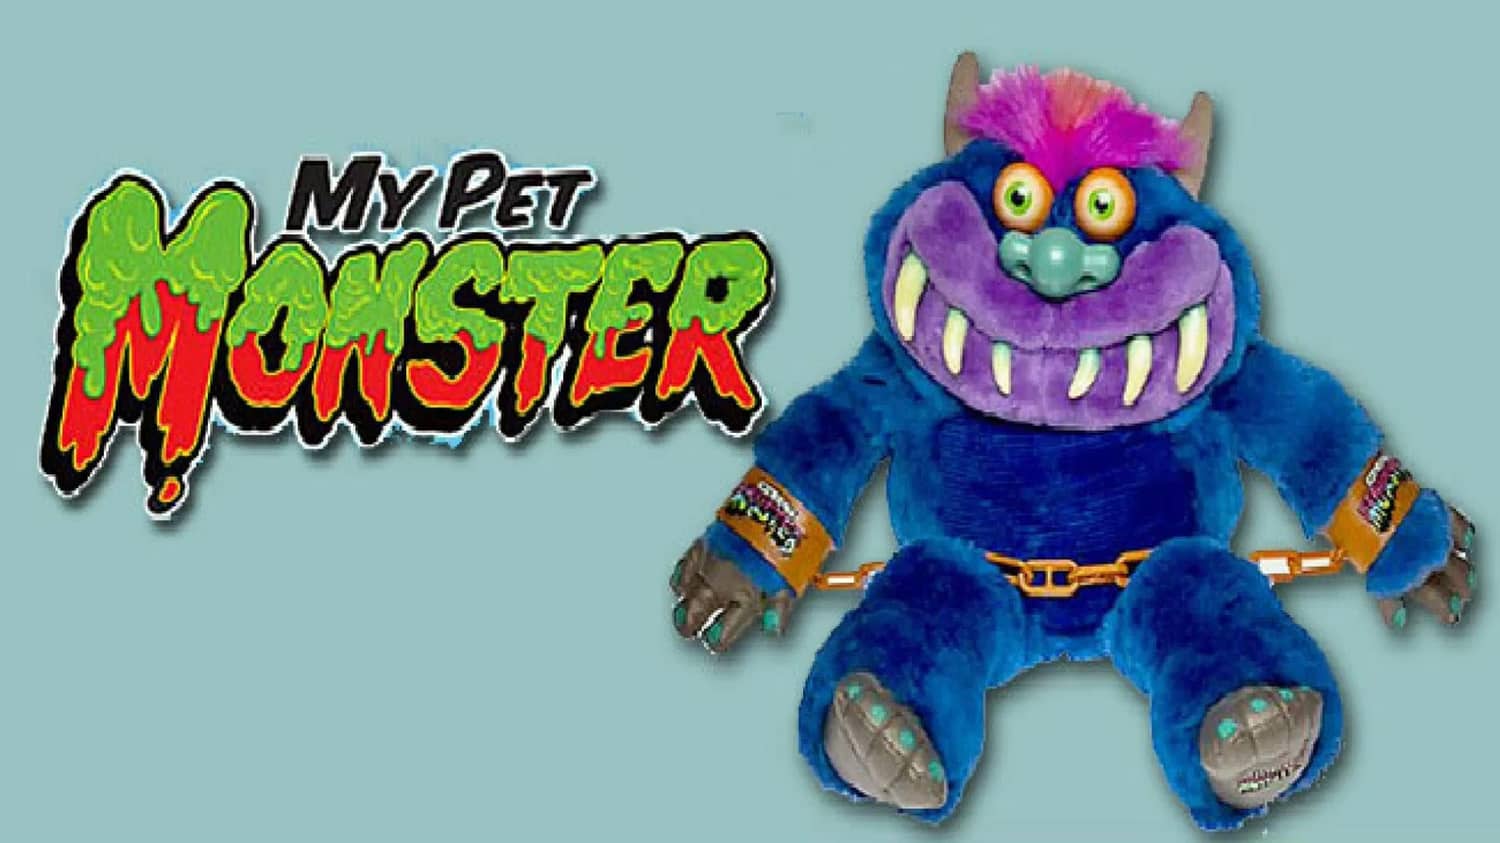 My Pet Monster,This endearing little doll was cute, furry and blue. It was the teddy bear for kids who didn’t want to actually have a teddy bear.